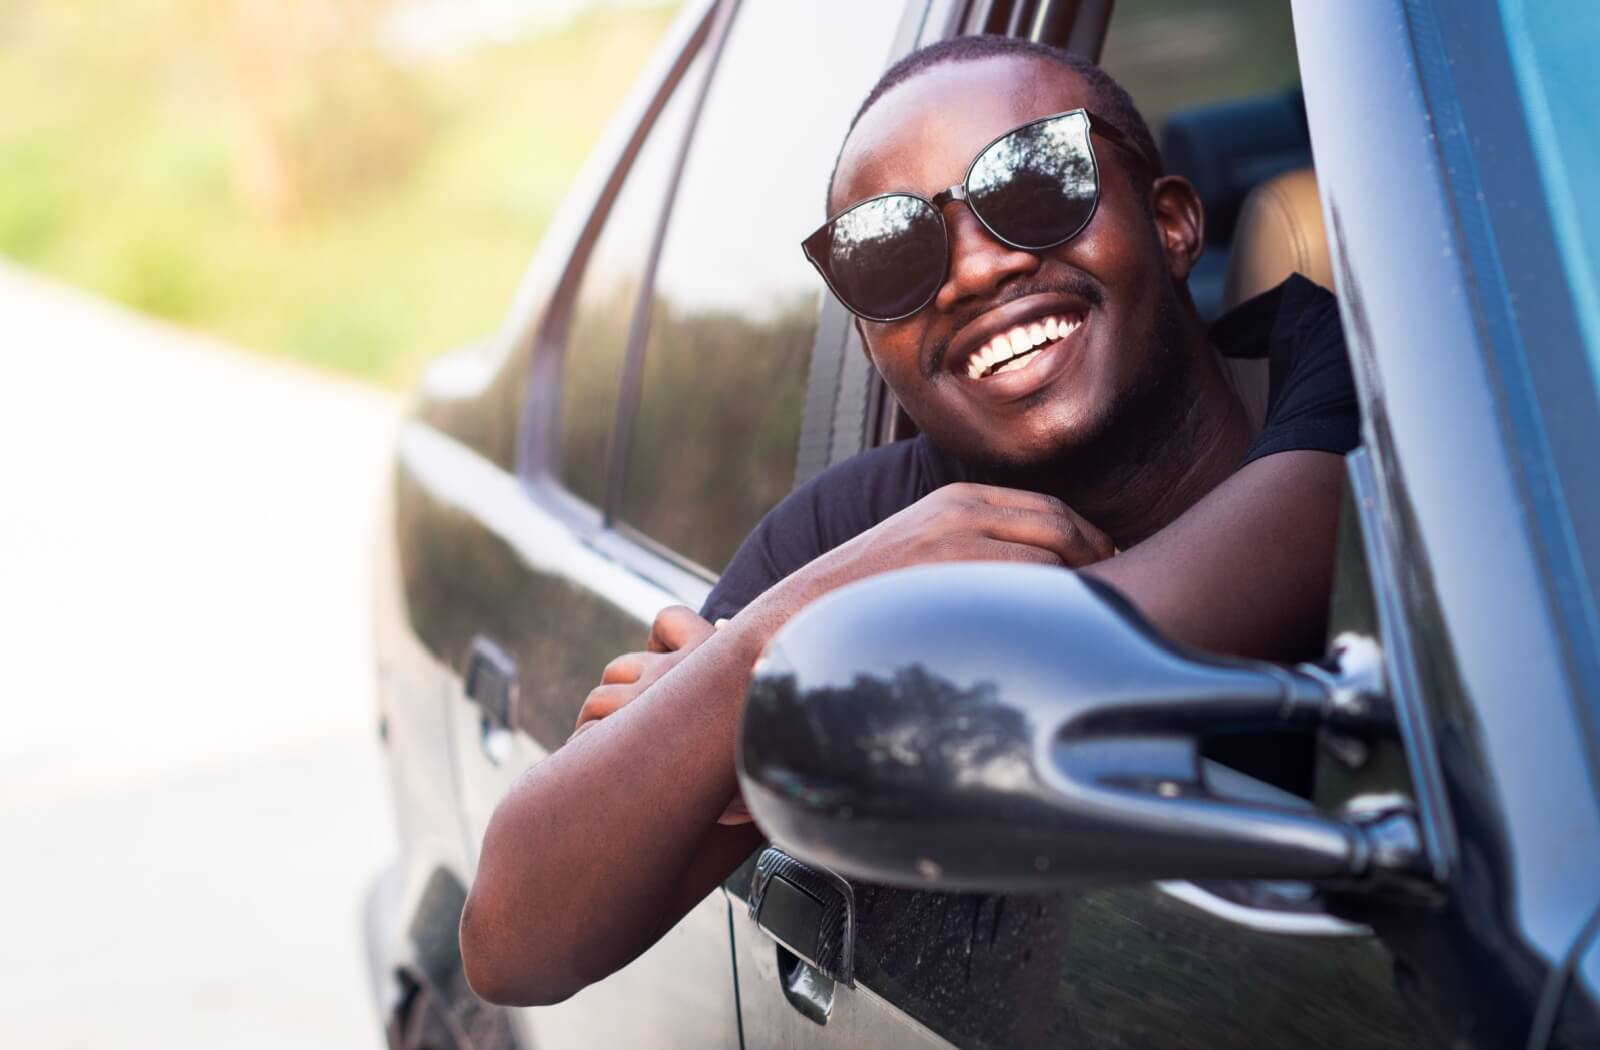 Young man wearing sunglasses smiling in a car.